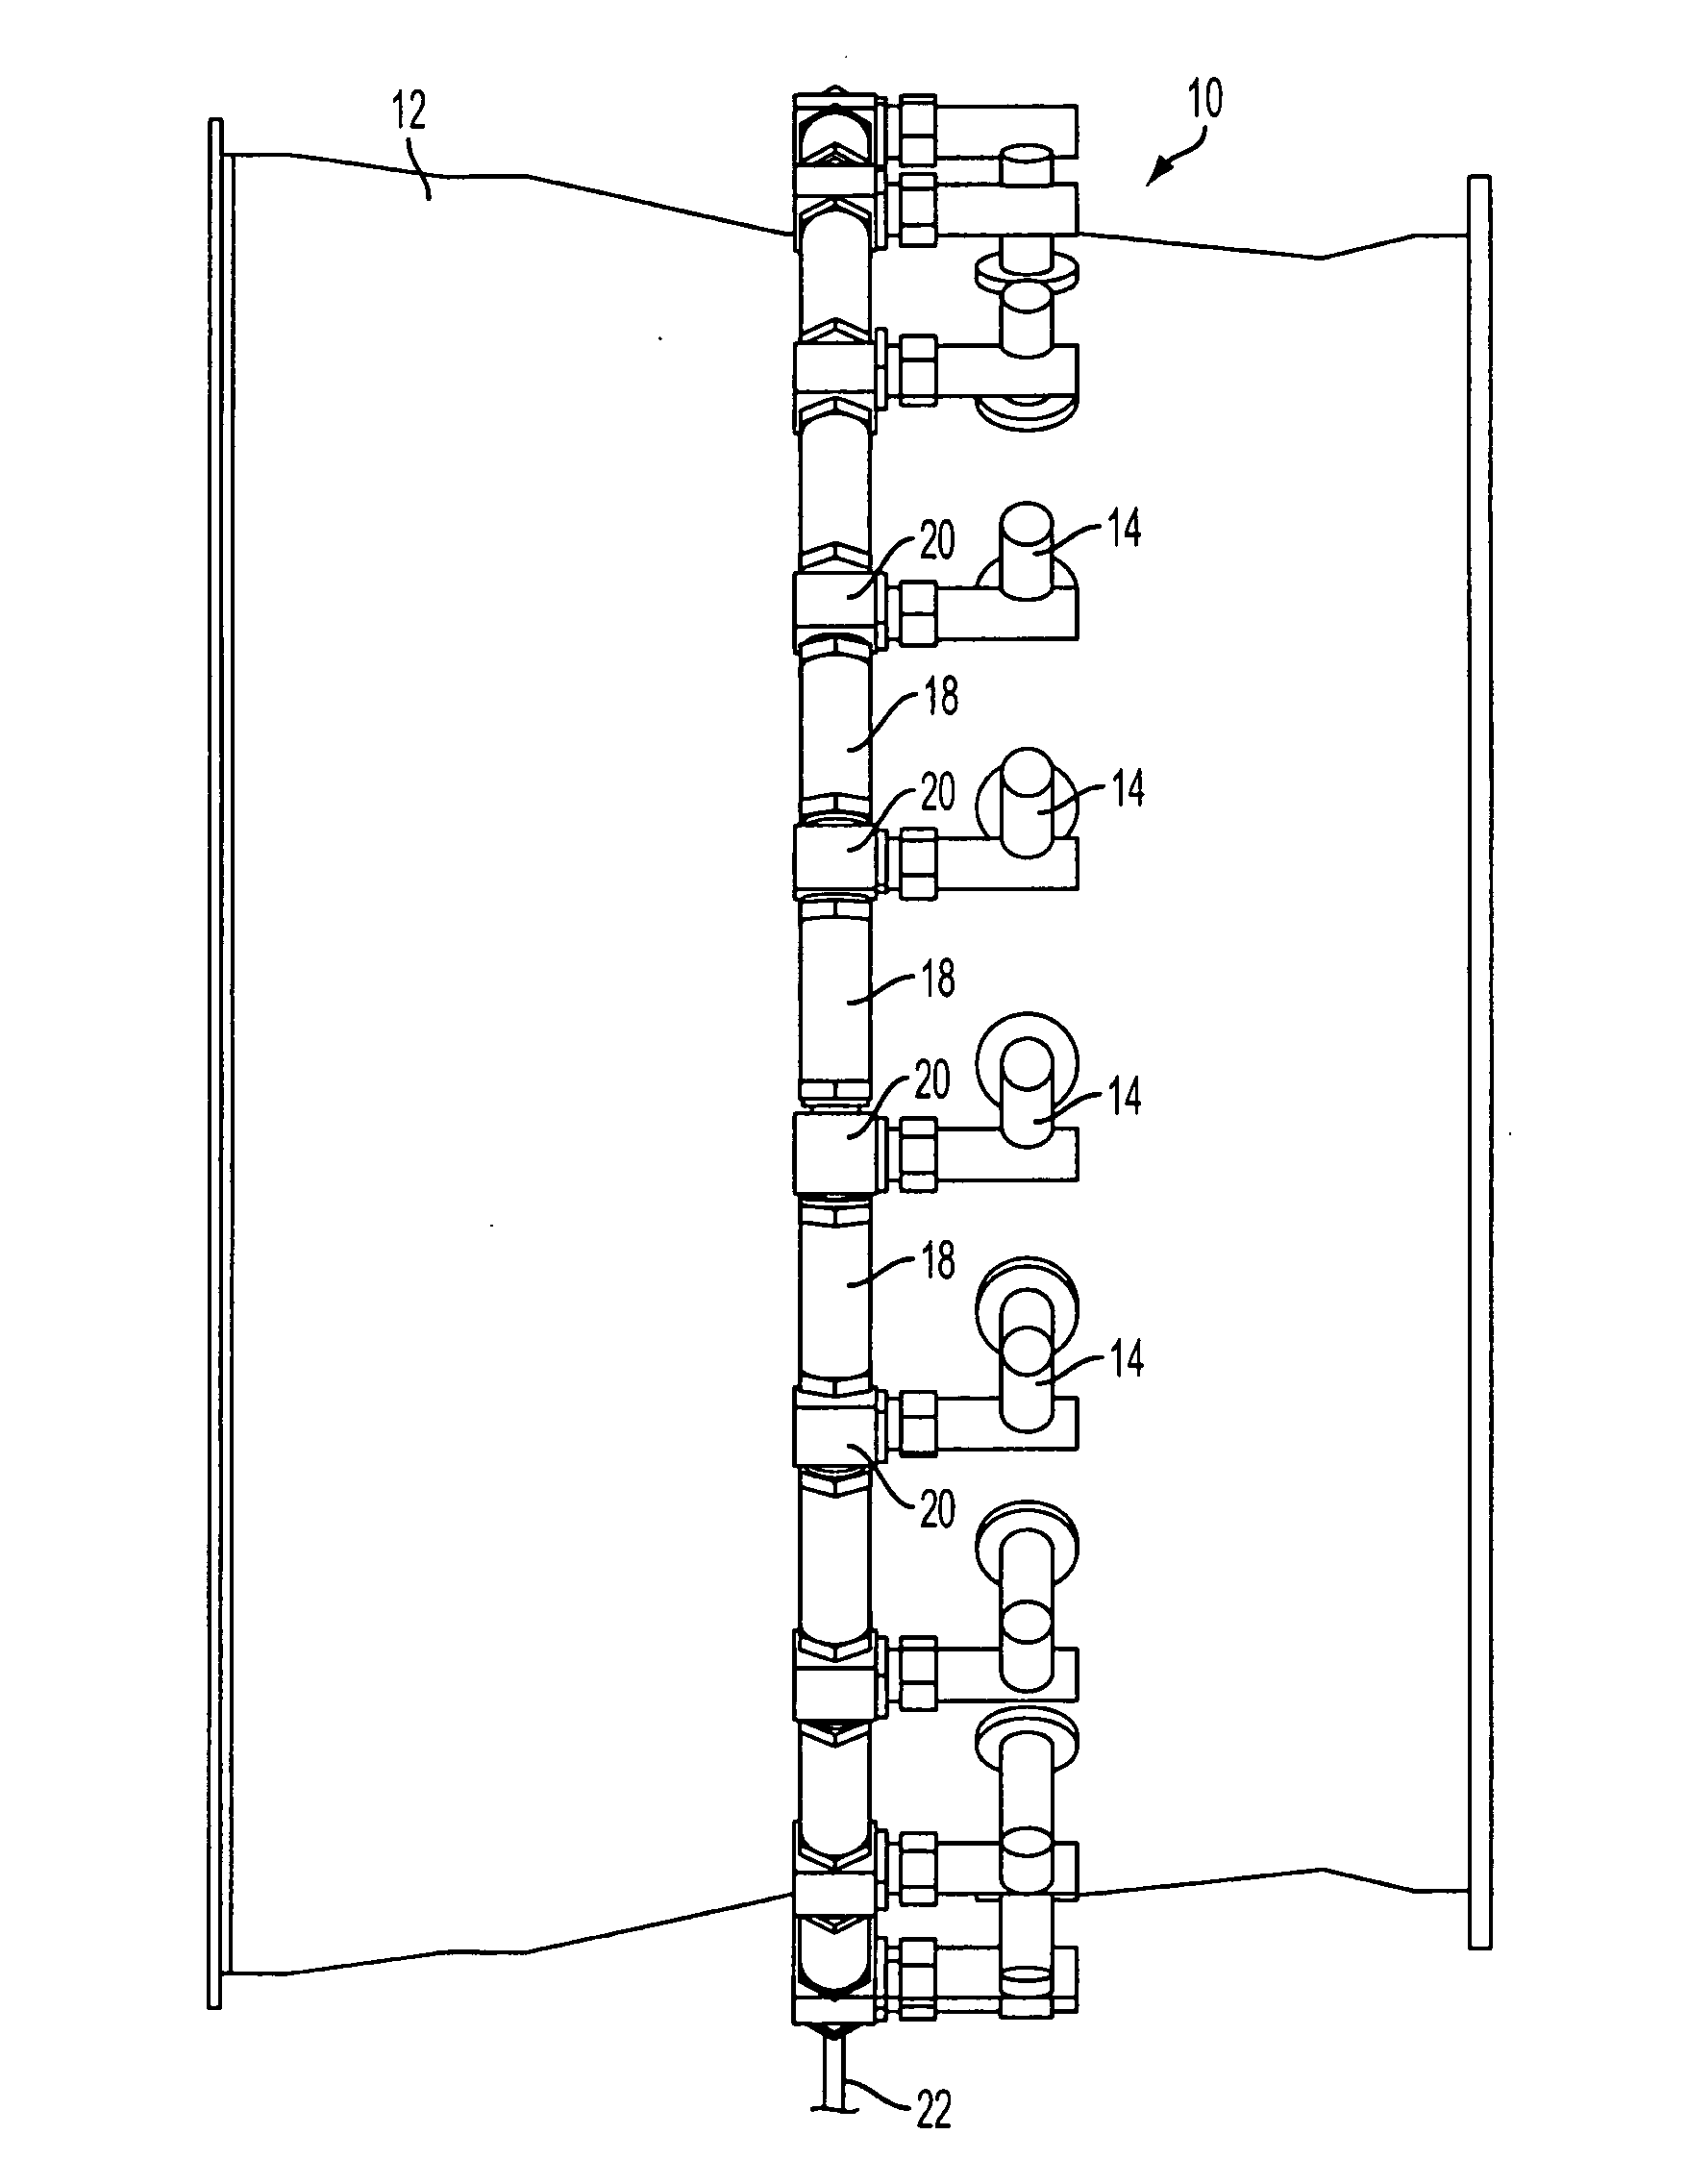 Fuel distribution manifold system for gas turbine engines